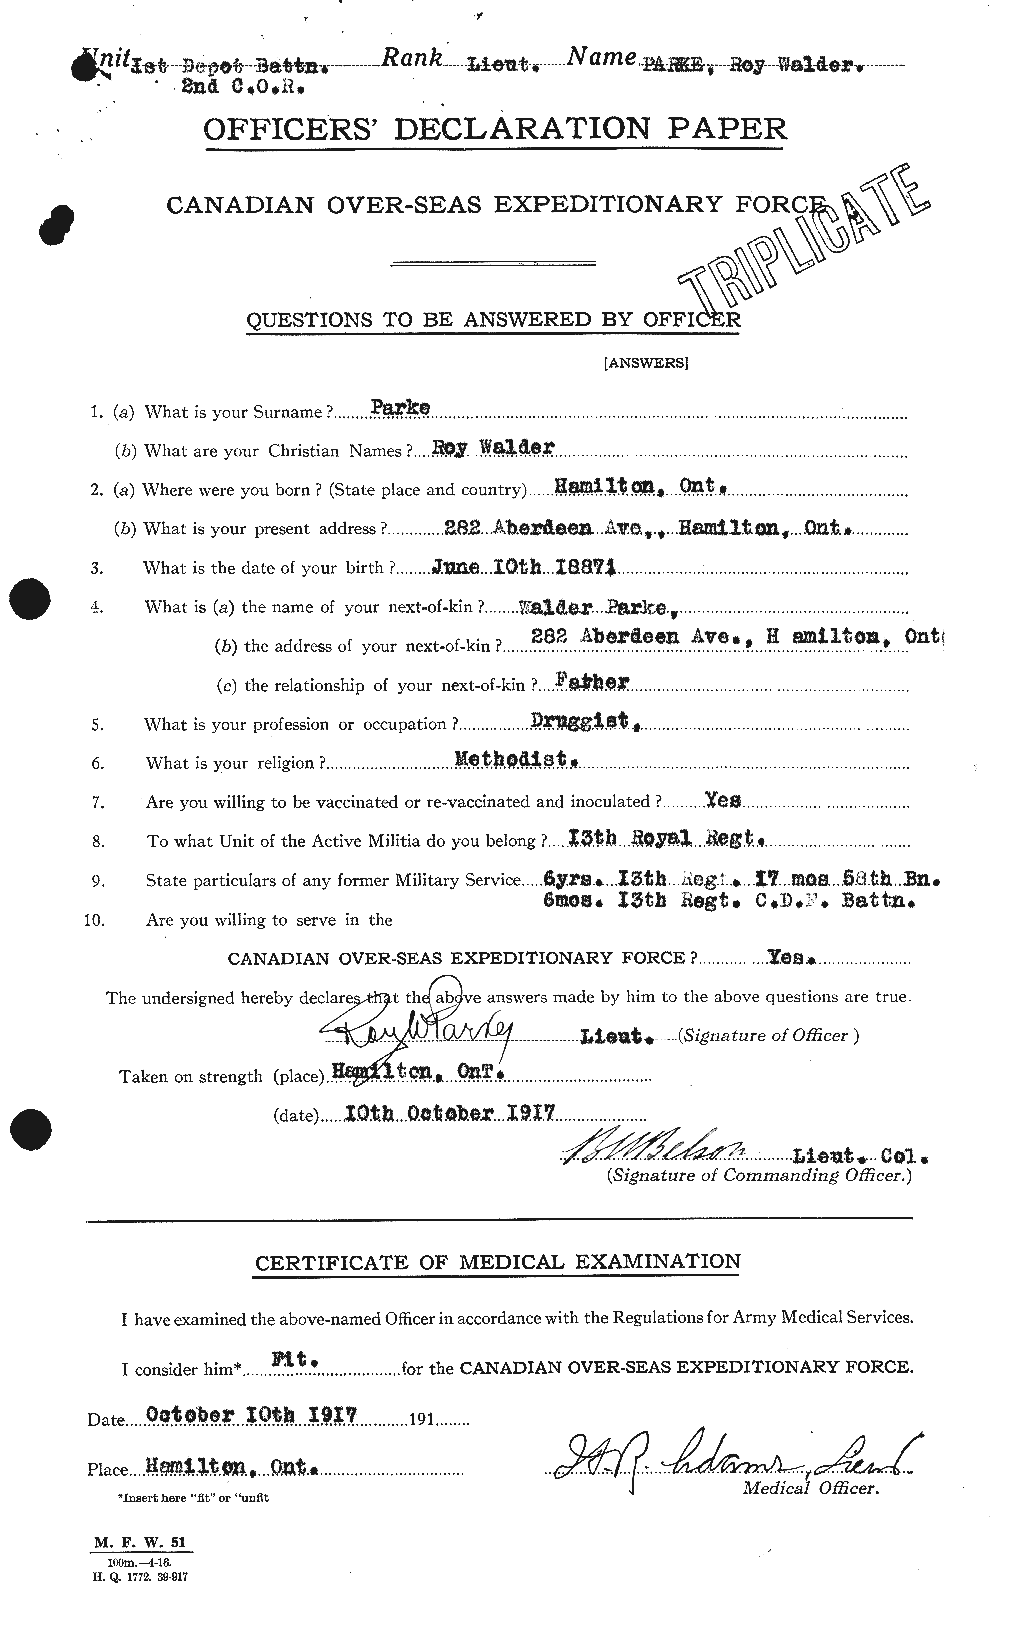 Personnel Records of the First World War - CEF 564943a